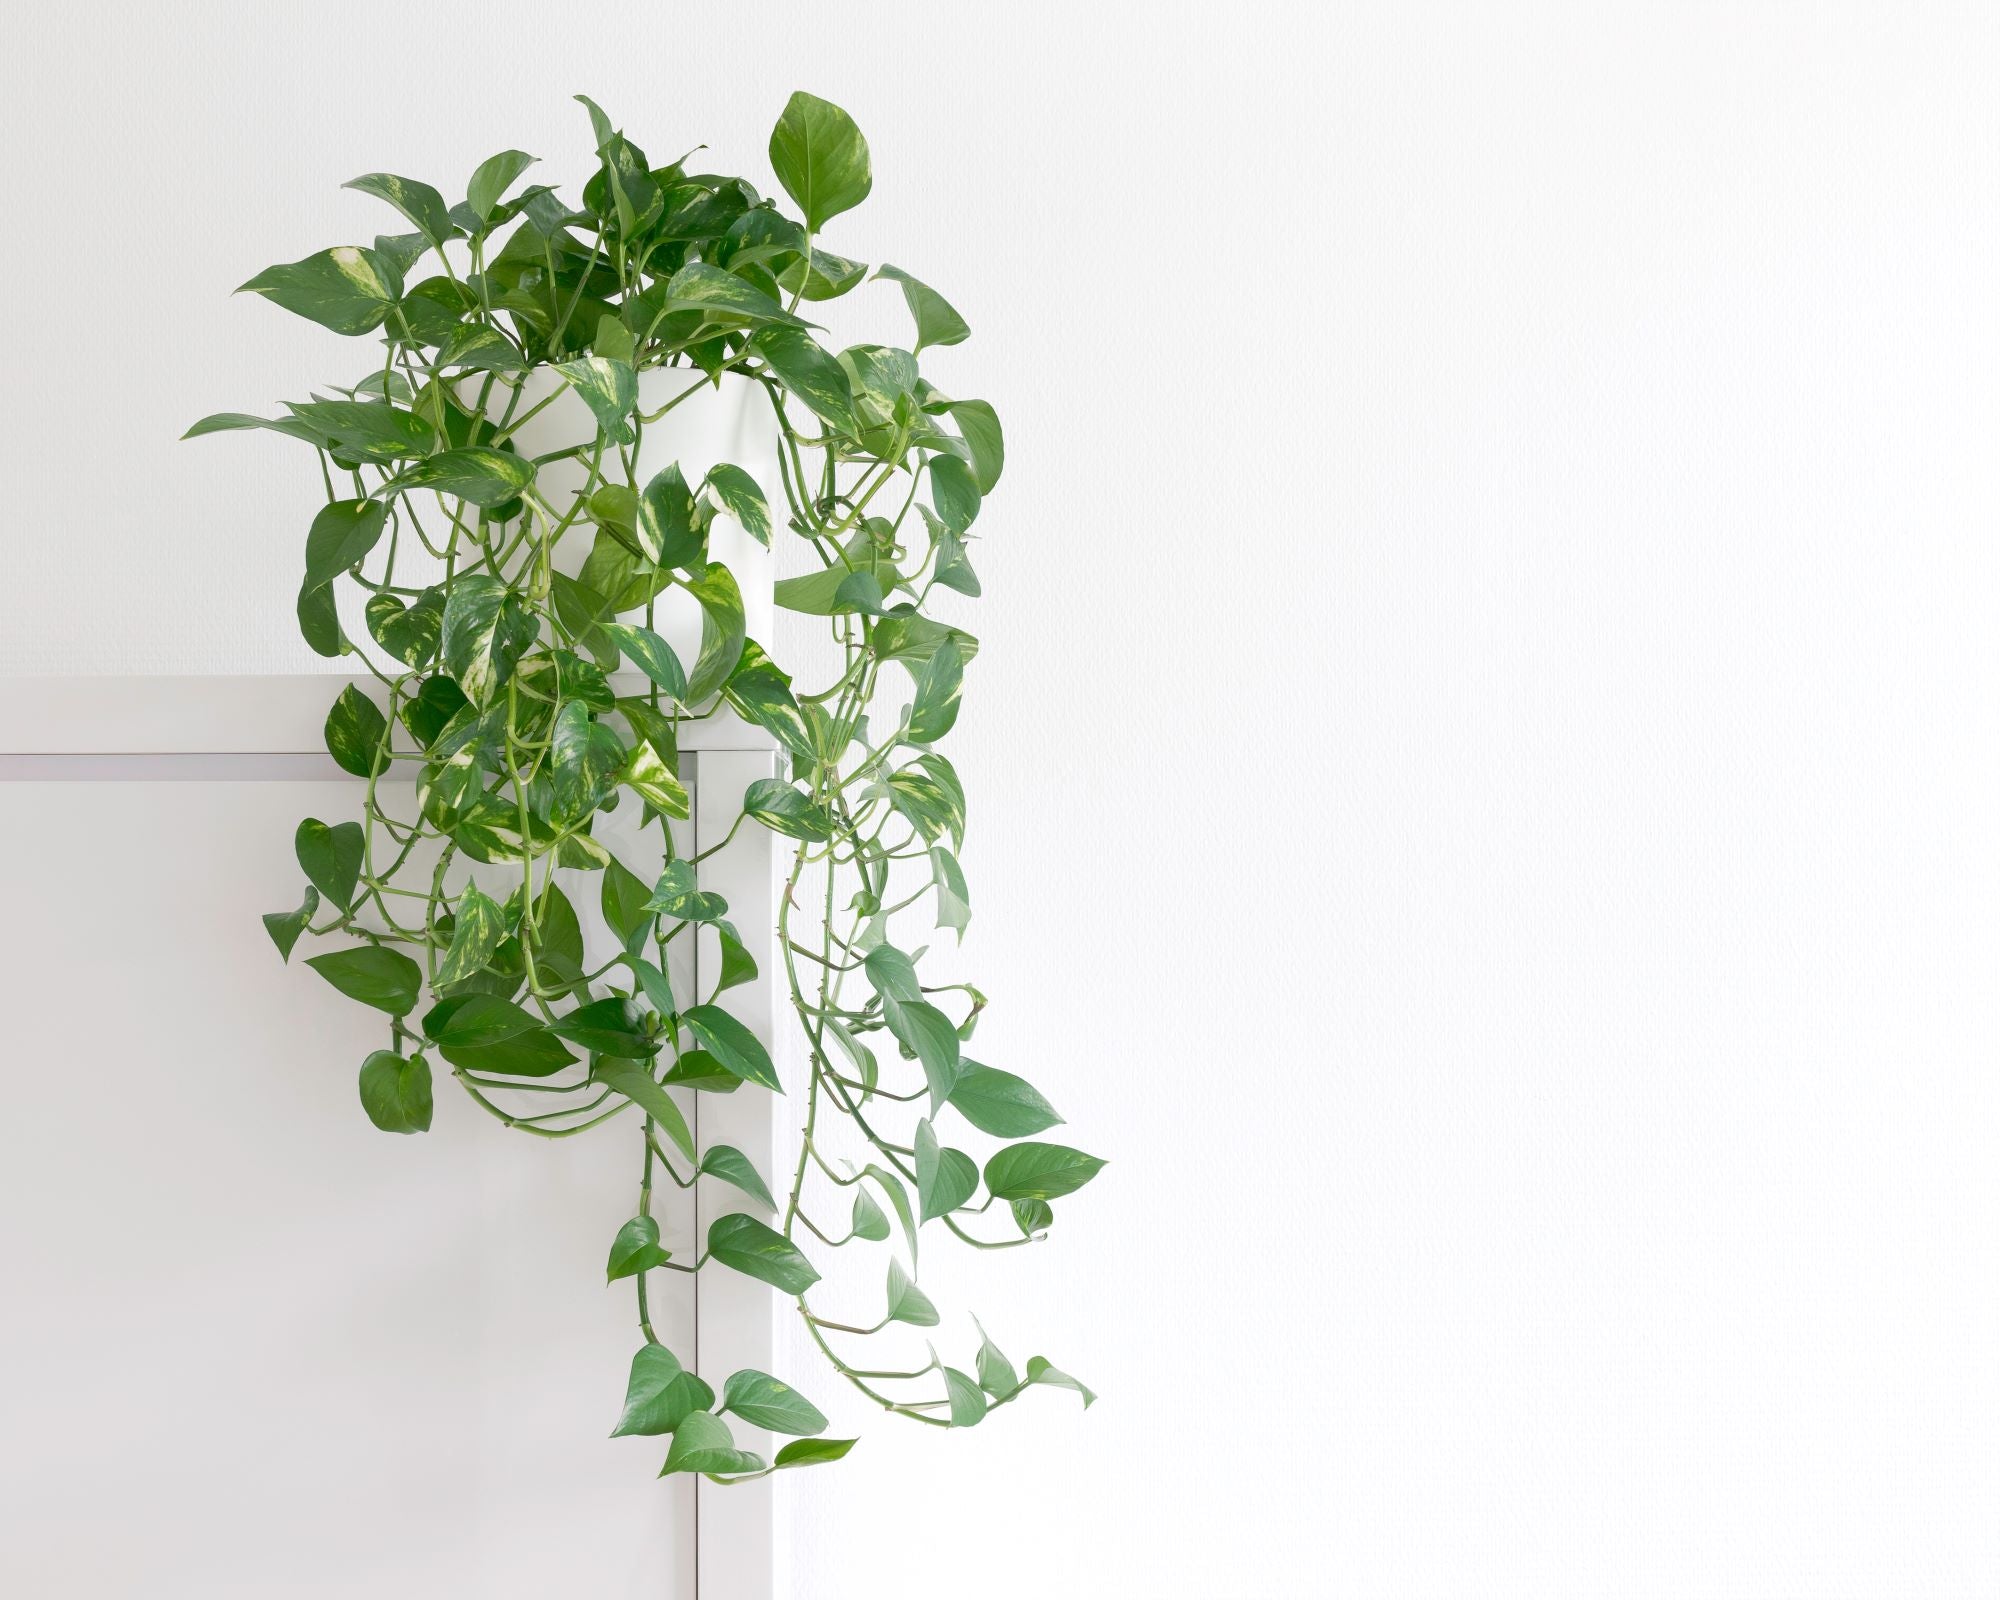 A golden pothos plant in a white pot, placed on a white ledge with a white background. The pothos vines over the edge of its pot, creating a natural and flowing appearance. The vibrant green color of the pothos leaves stands out against the white background, creating a visually appealing display.